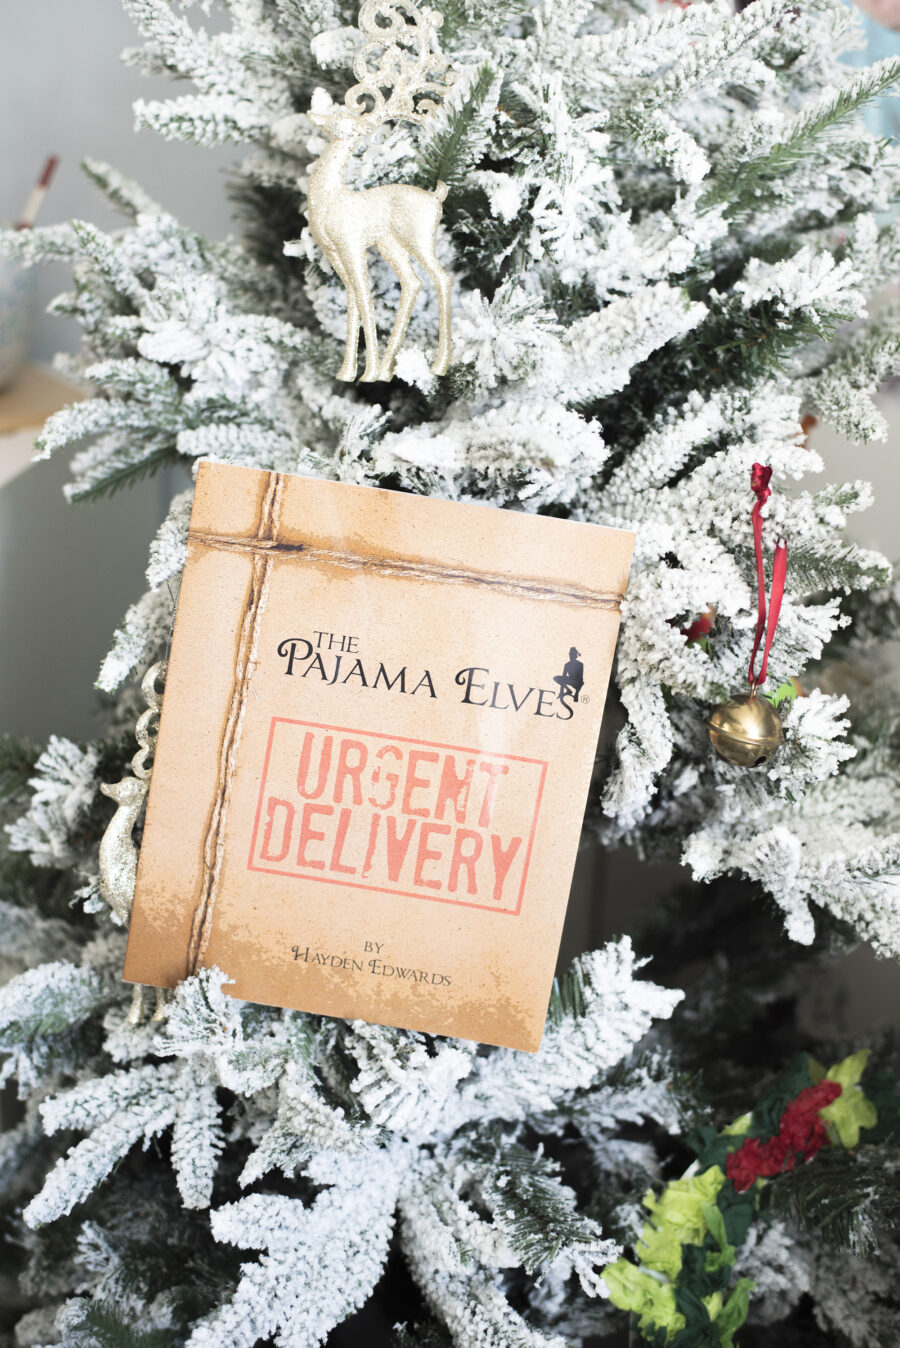 Pajama Elves book for the pyjama elves family tradition. Image by keep up with the jones family.